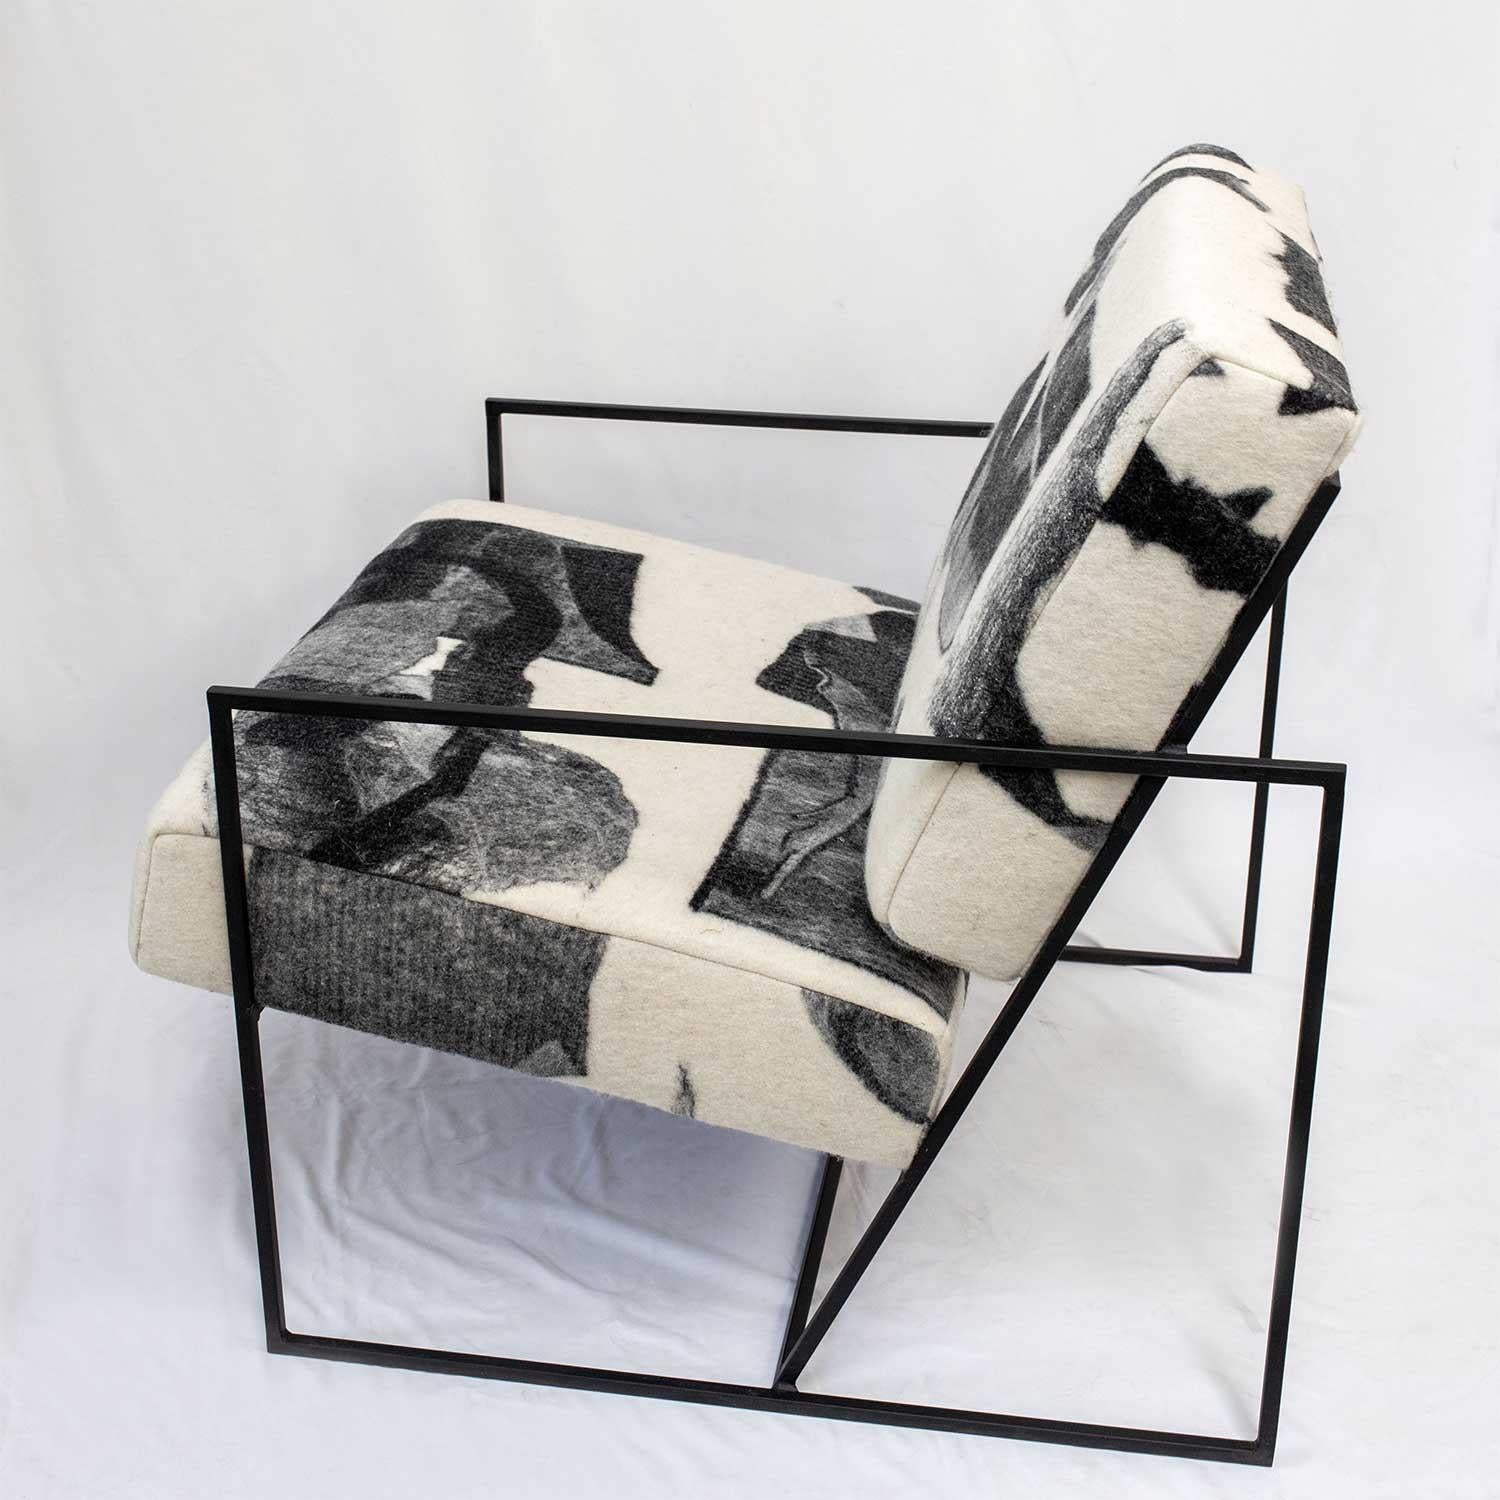 The Ziggy chair is a solid metal steel frame offered in black matte or brass colors and is the perfect showcase for JG SWITZER's felted, wool fabric. Steel frame is powder coated. 

Fabric yardage is a one-of-a-kind, 